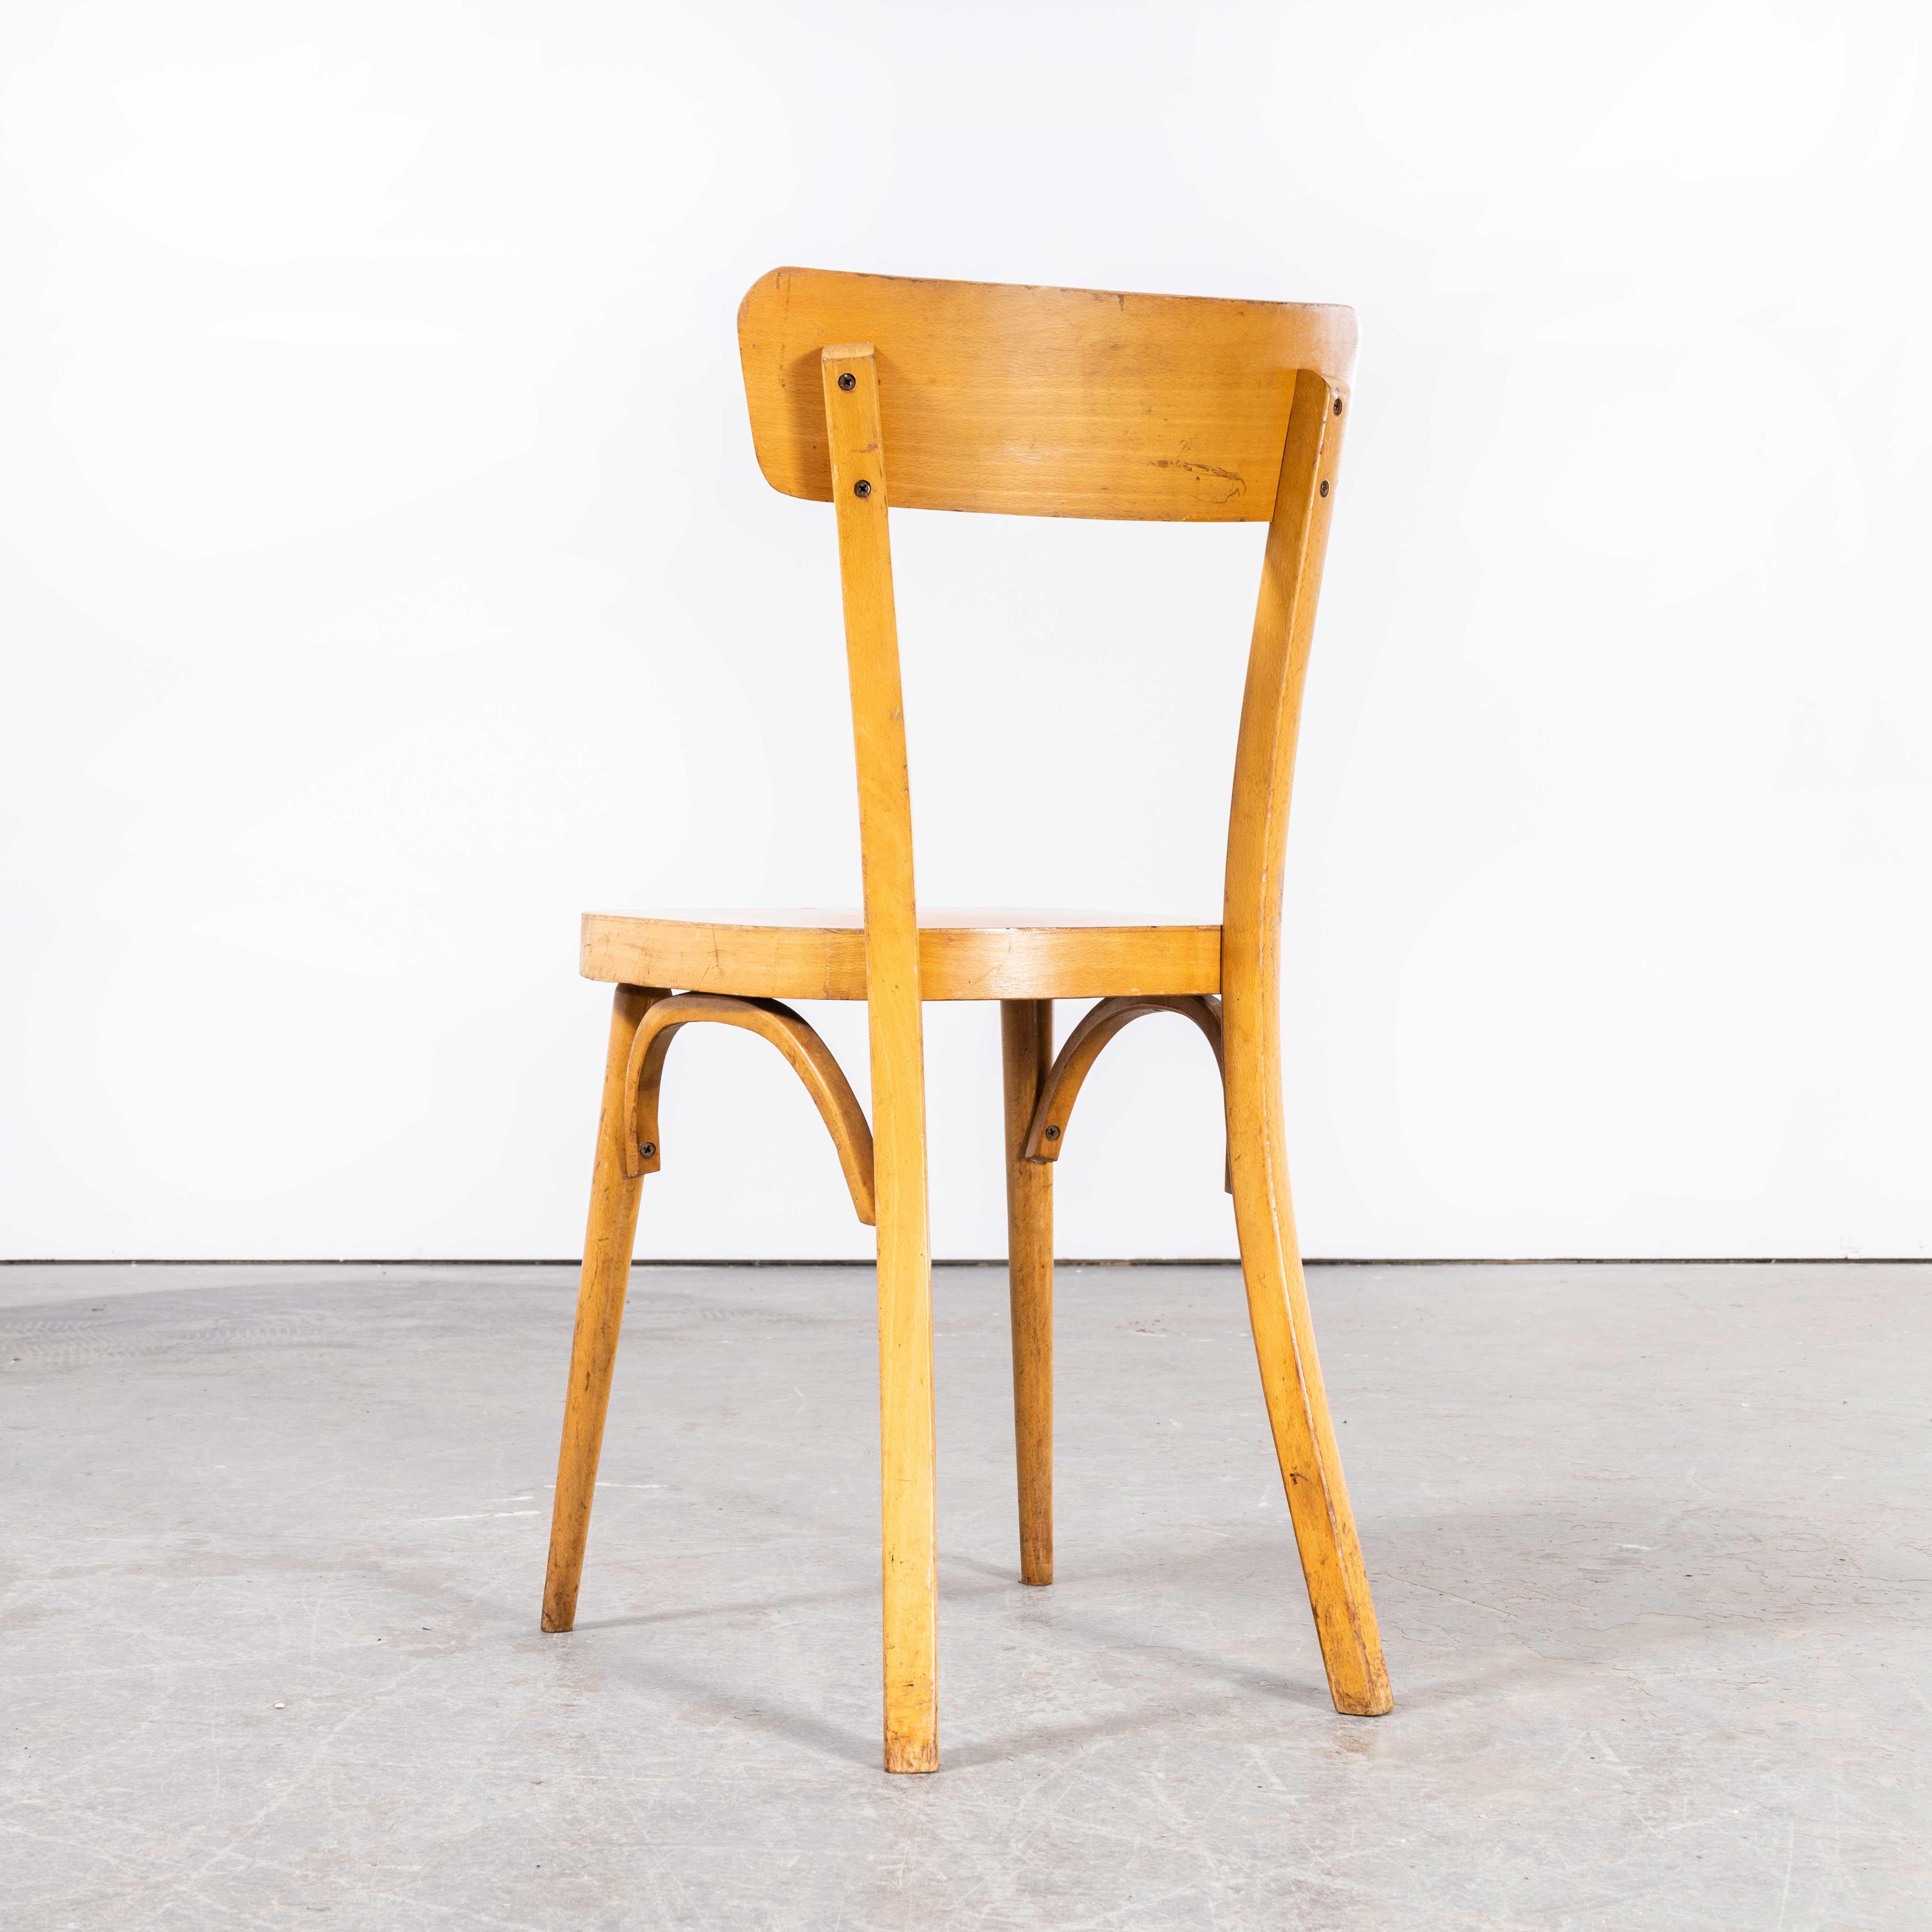 1950’s French Baumann blonde round leg bentwood dining chairs – set of four
1950’s French Baumann blonde round leg bentwood dining chairs – set of four. Baumann is a slightly off the radar French producer just starting to gain traction in the